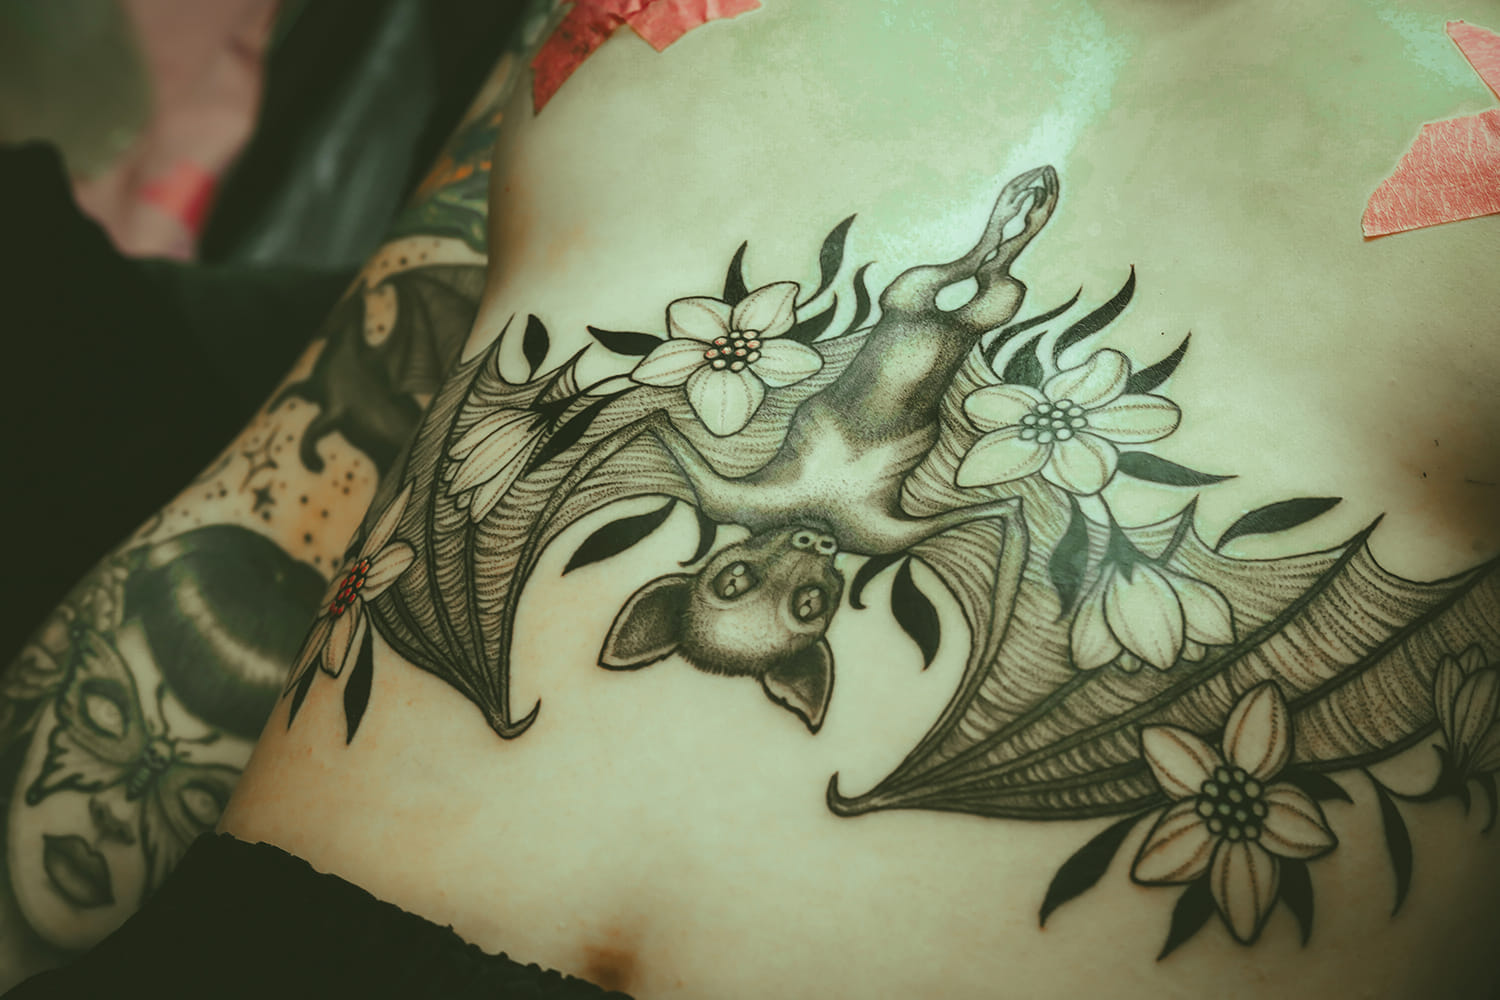 bat tattoo on stomach by miguel angel flores photo copyright Adriana de Barros